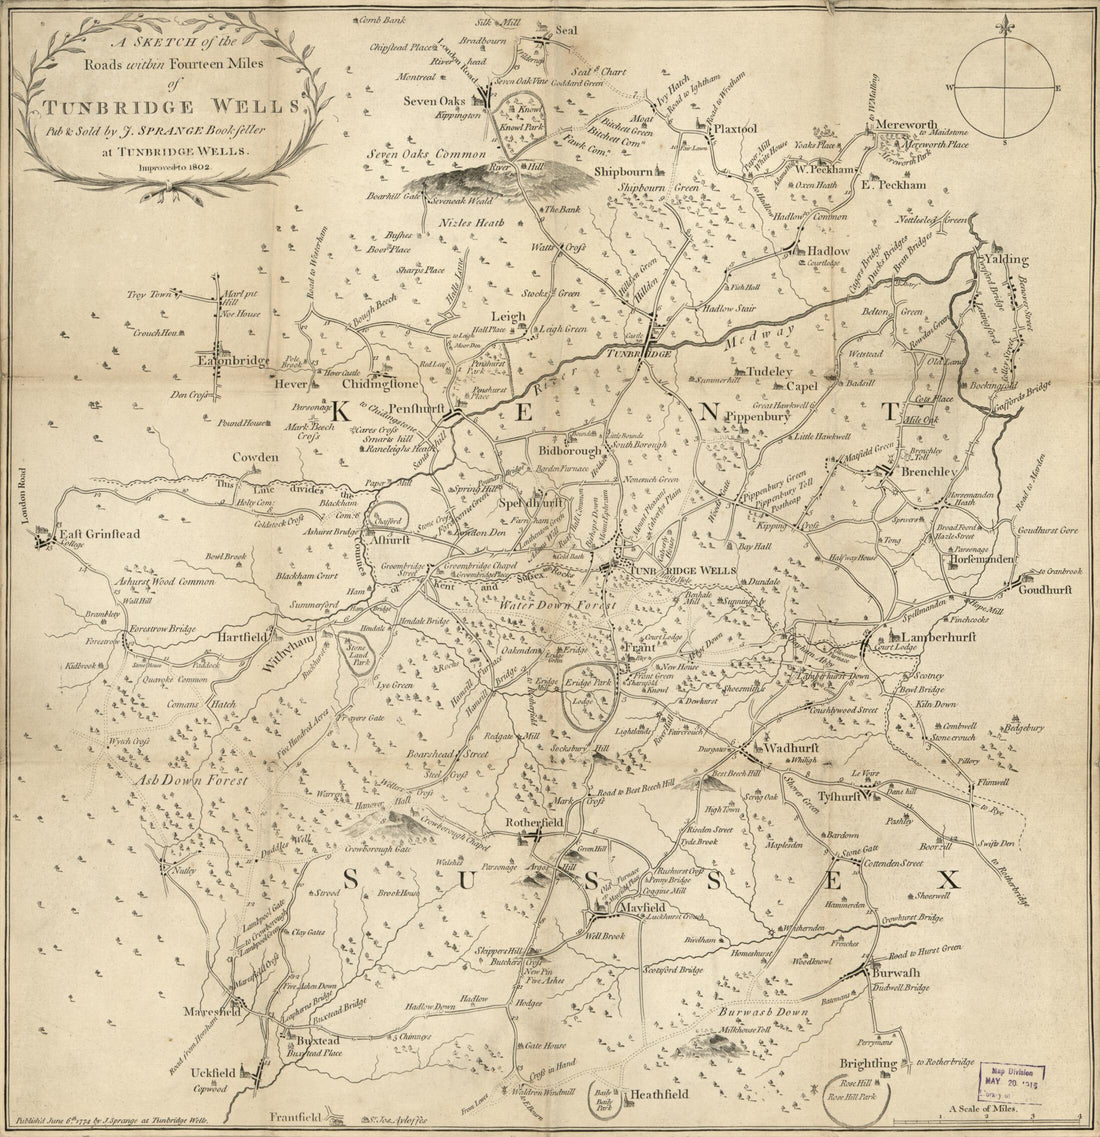 This old map of A Sketch of the Roads Within Fourteen Miles of Tunbridge Wells from 1802 was created by Millard Fillmore, J. (Jasper) Sprange in 1802